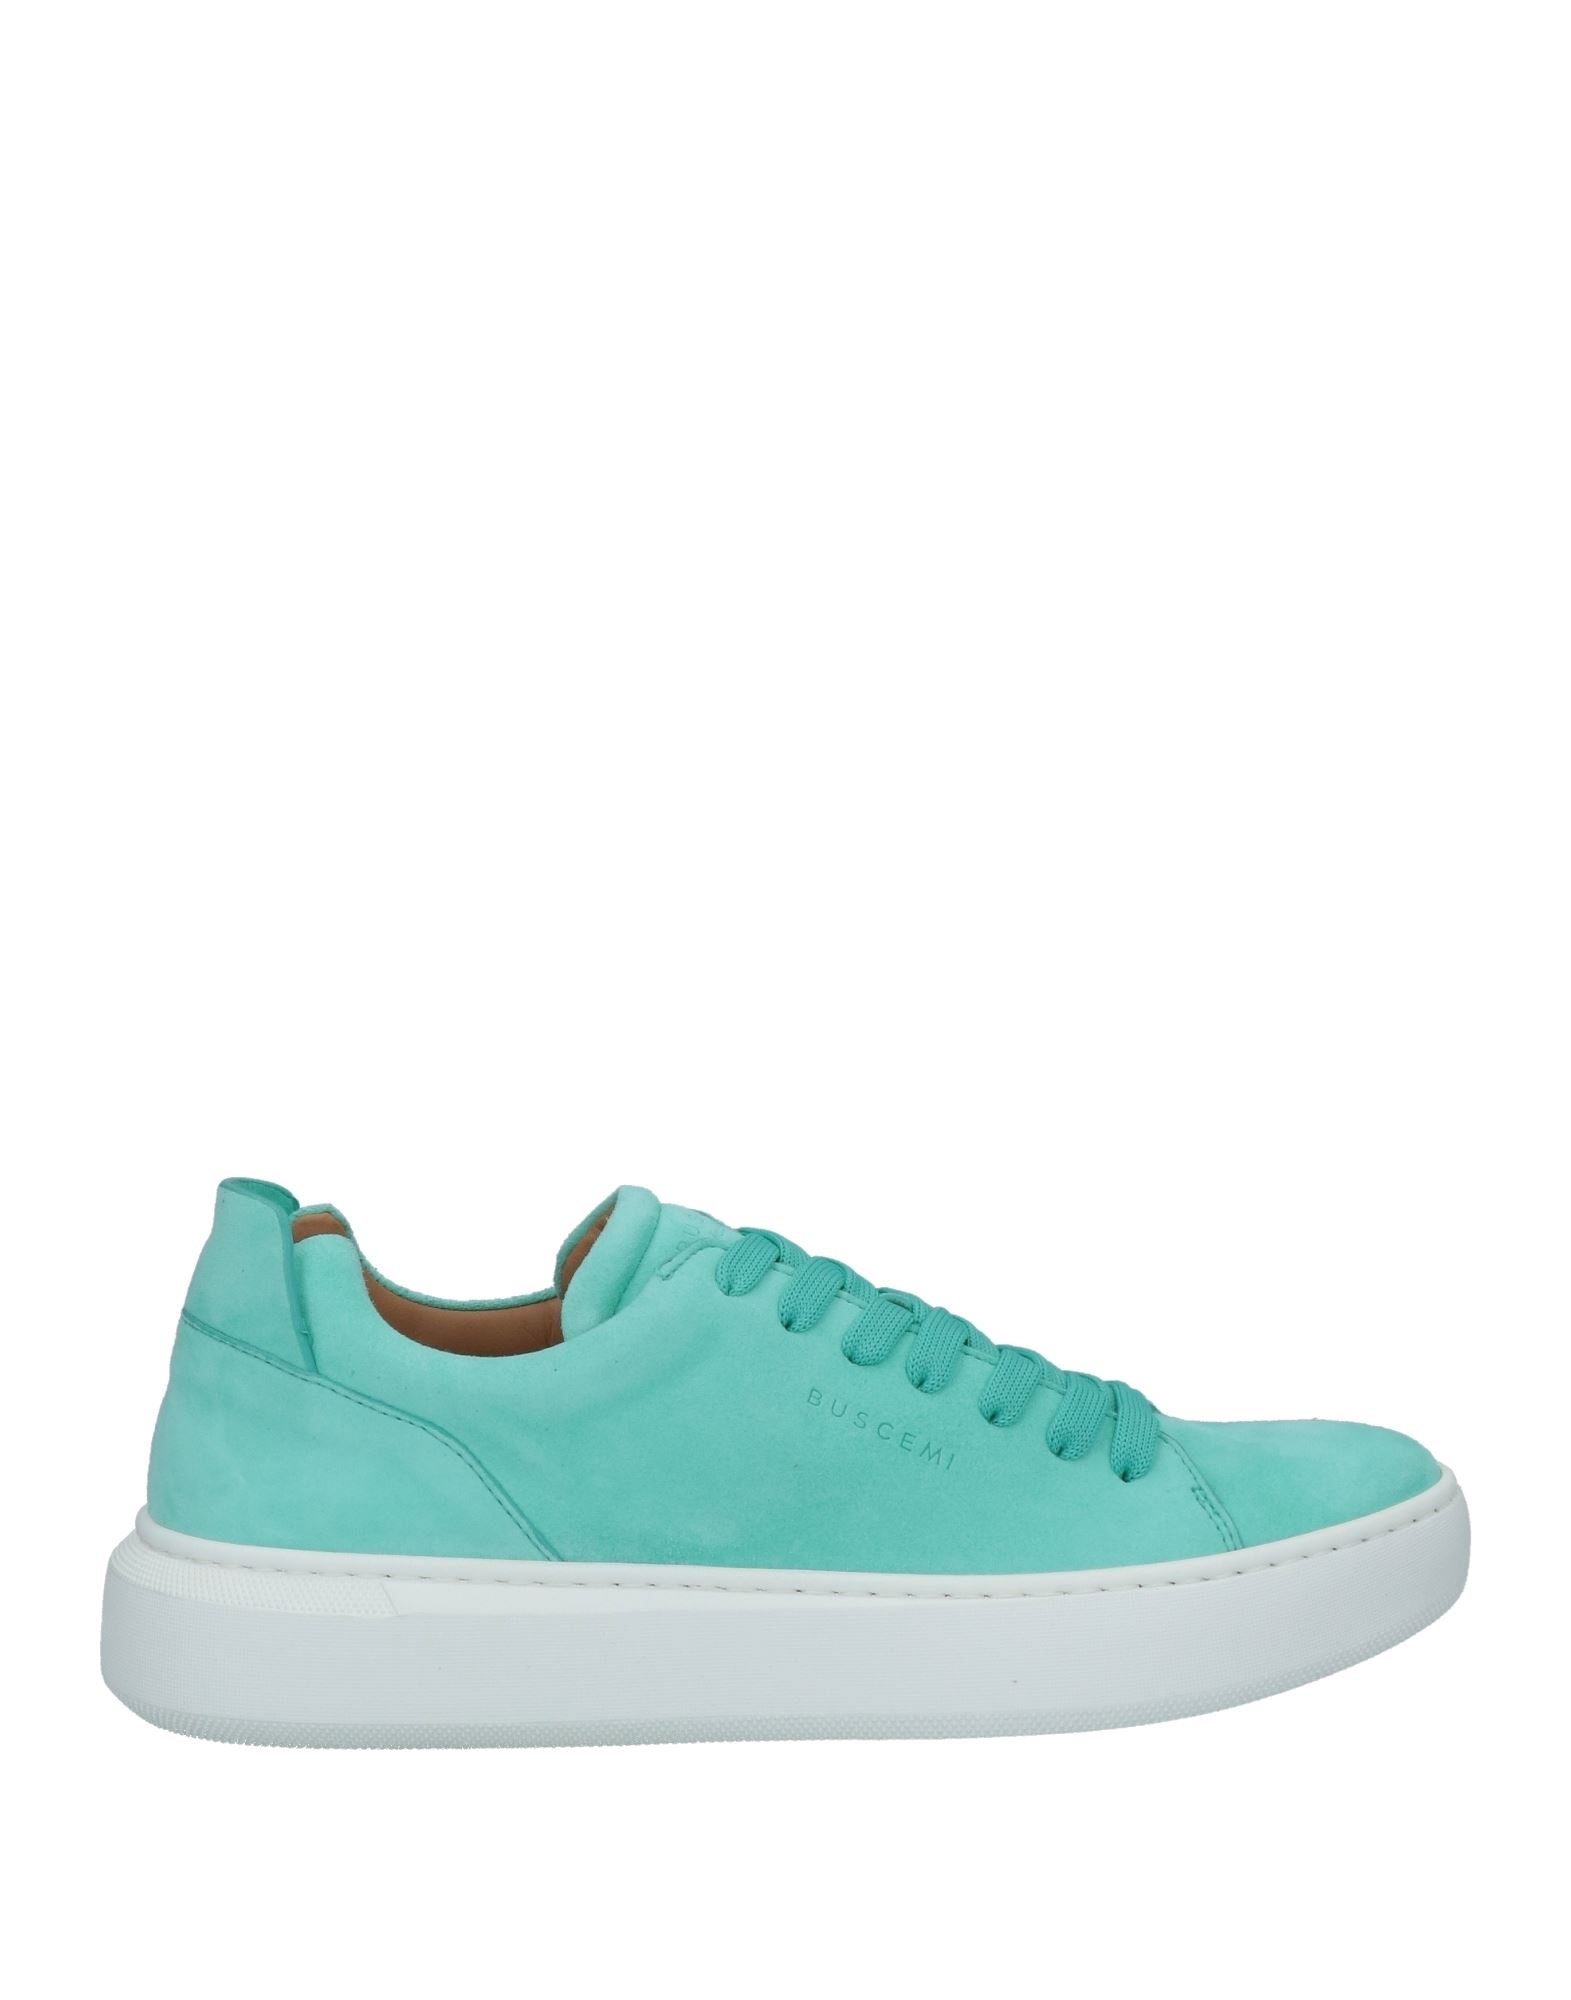 Buscemi Sneakers In Turquoise